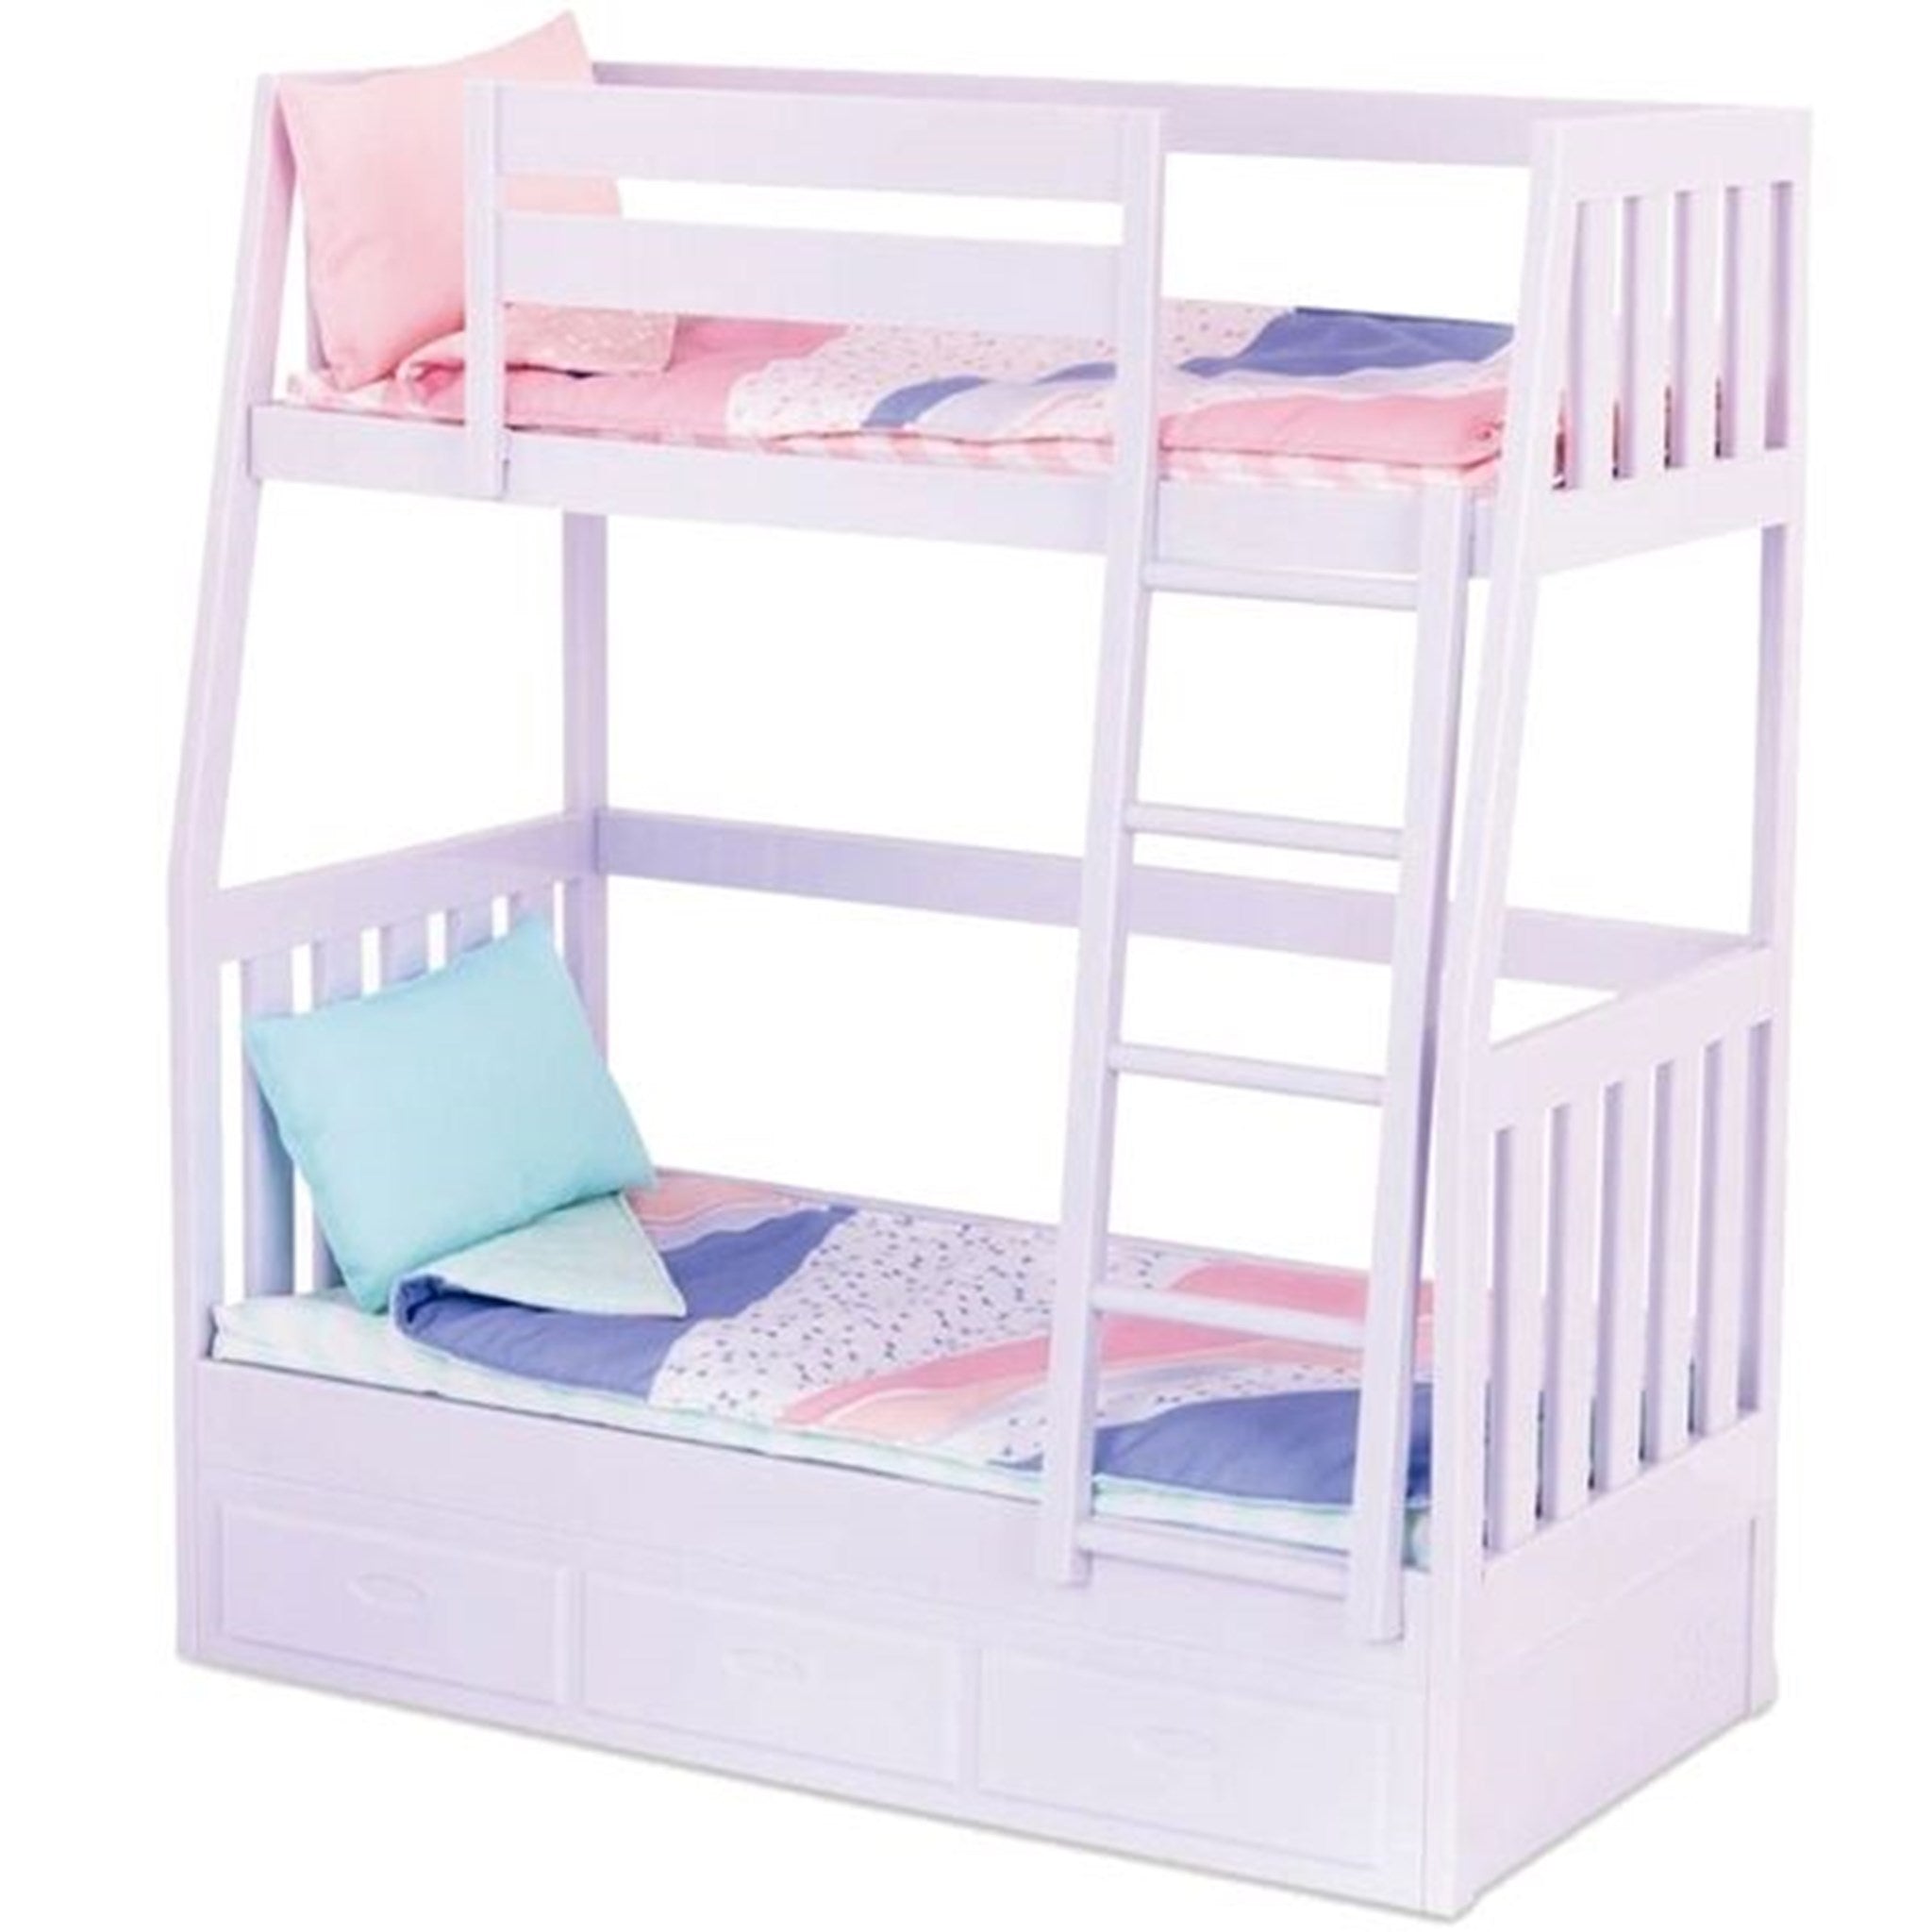 Our Generation Bunk Bed